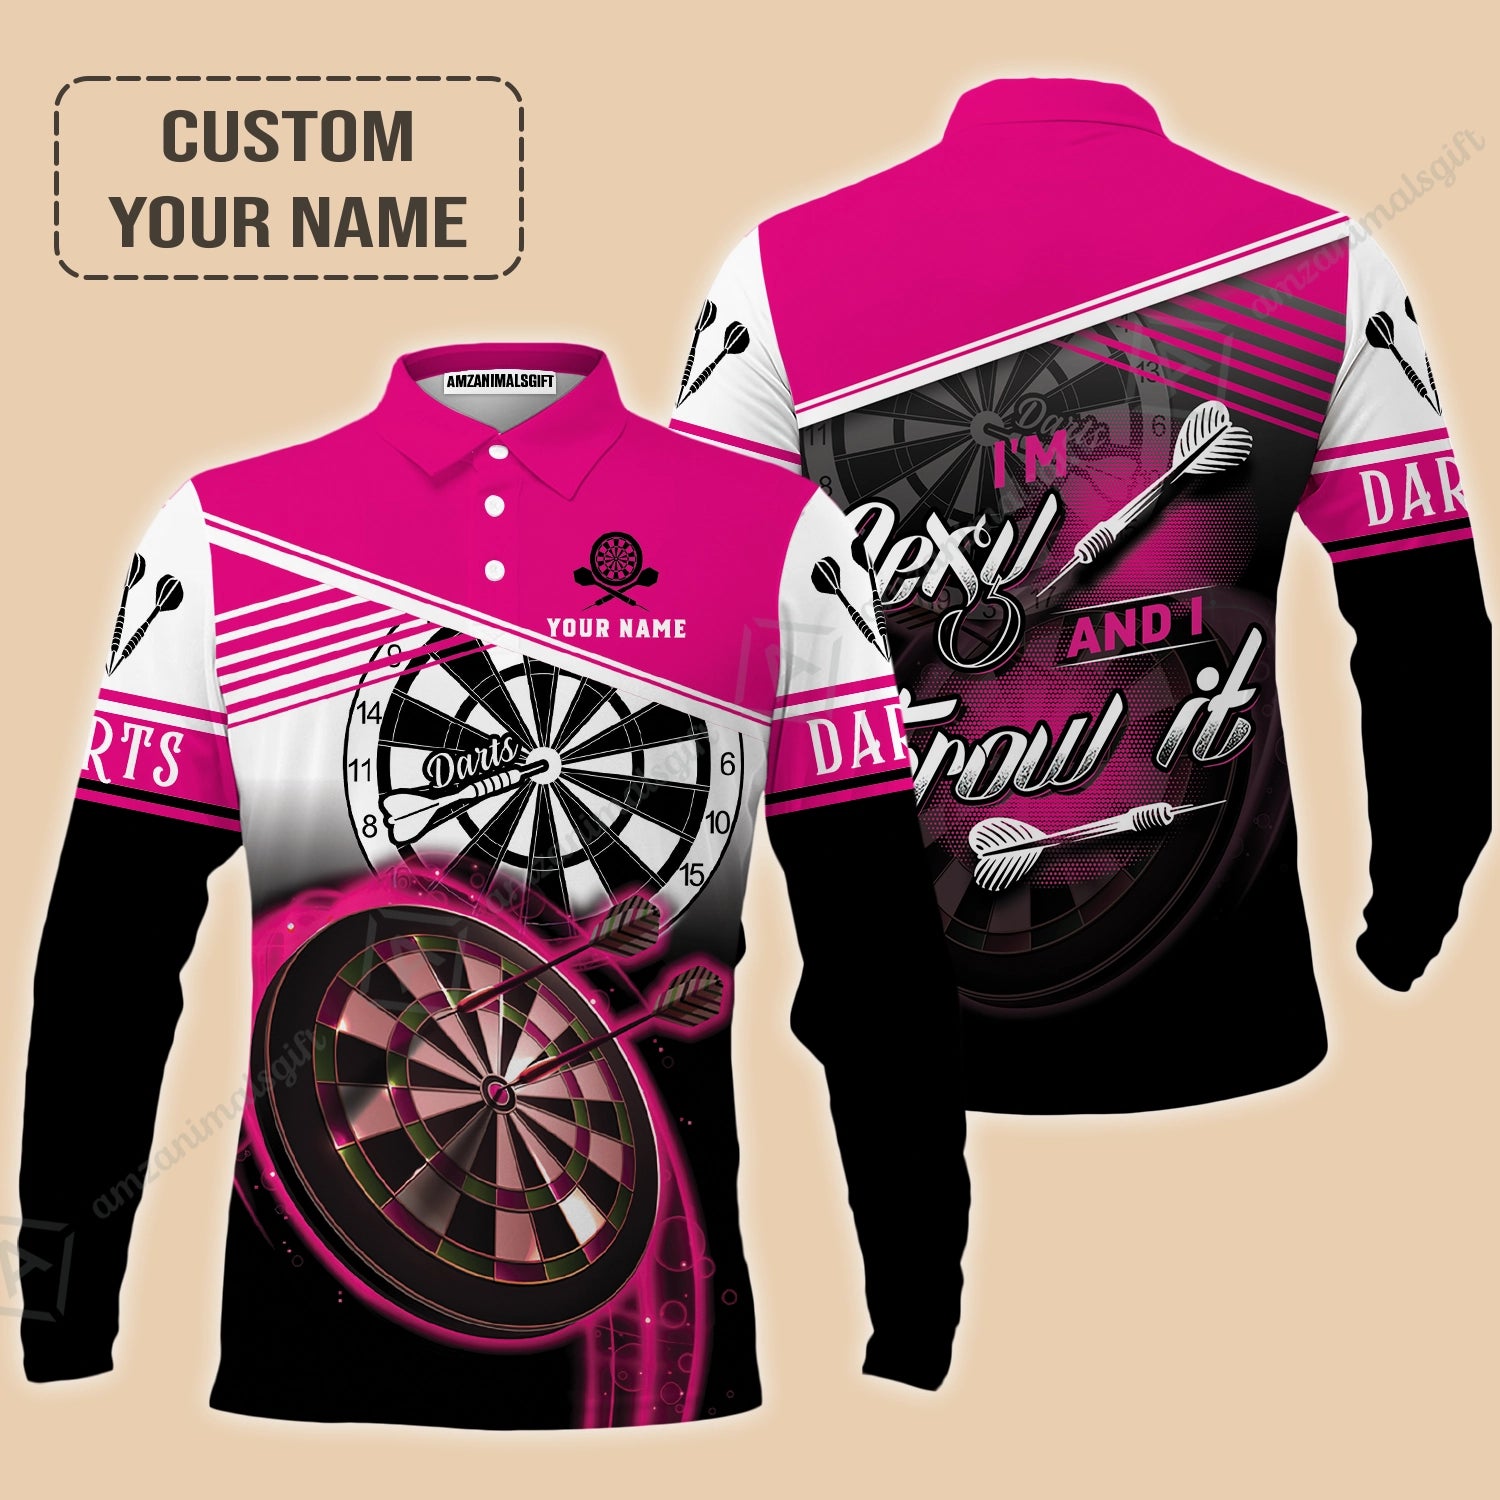 Personalized Darts Long Polo Shirt, Darts Pink Color Custom Name Shirt I'm Sexy And I Throw It, Outfits For Darts Players, Darts Team